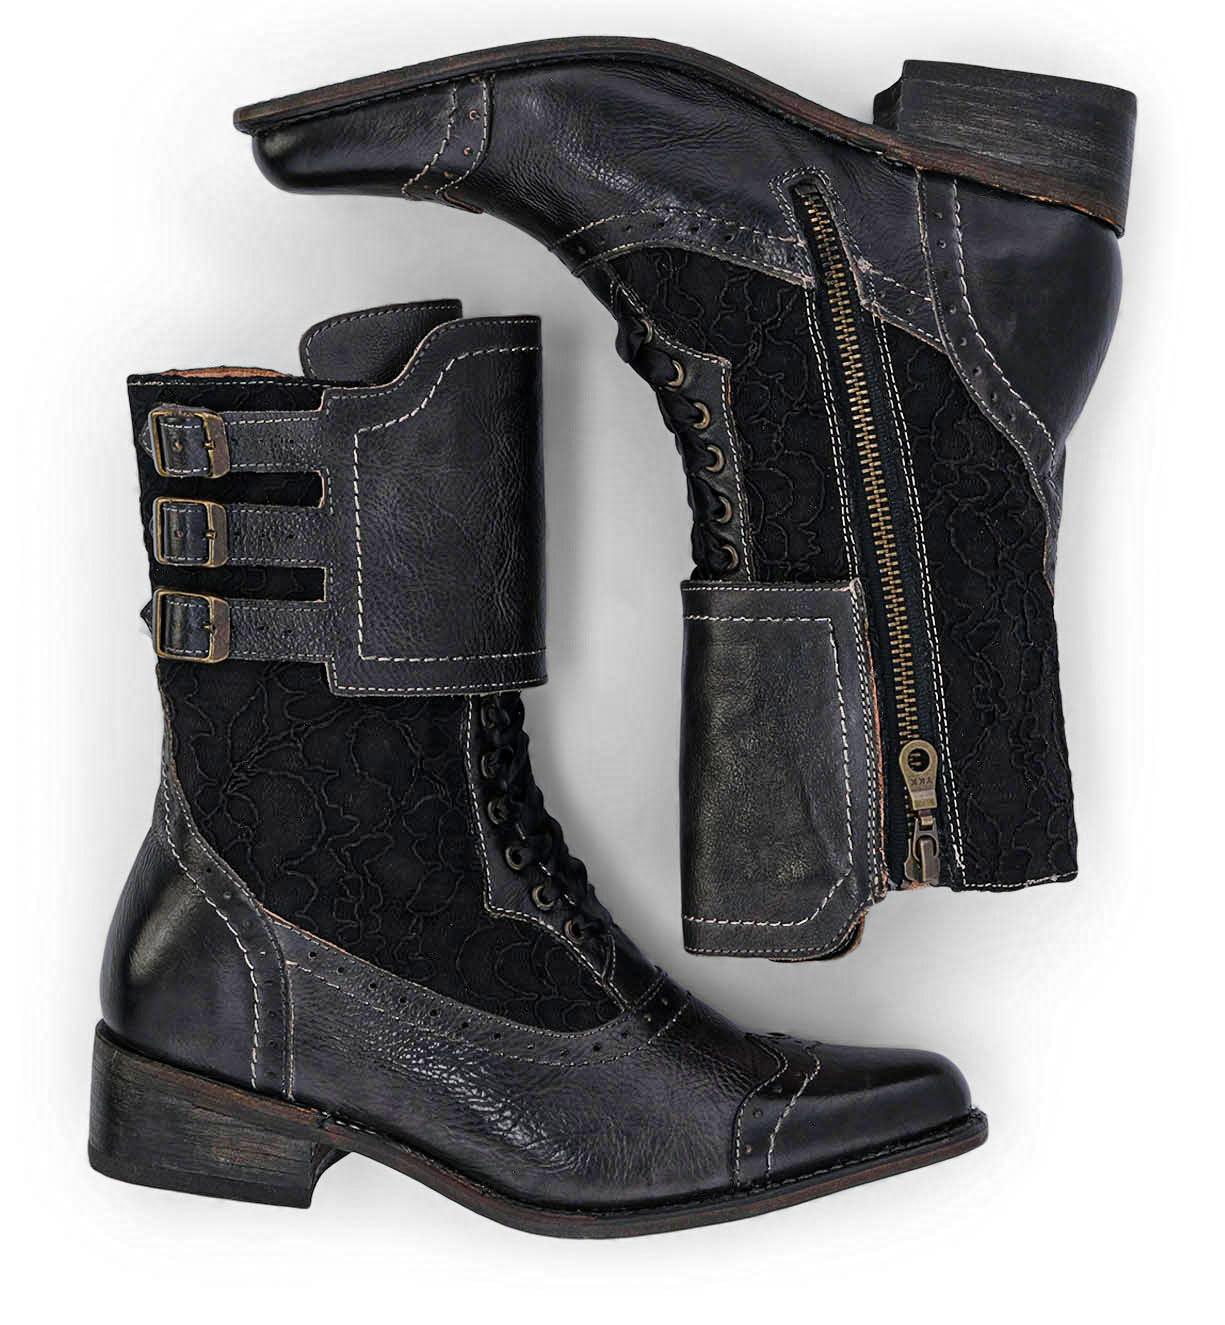 A pair of handcrafted Oak Tree Farms Faye leather riding boots with zippers and buckles.